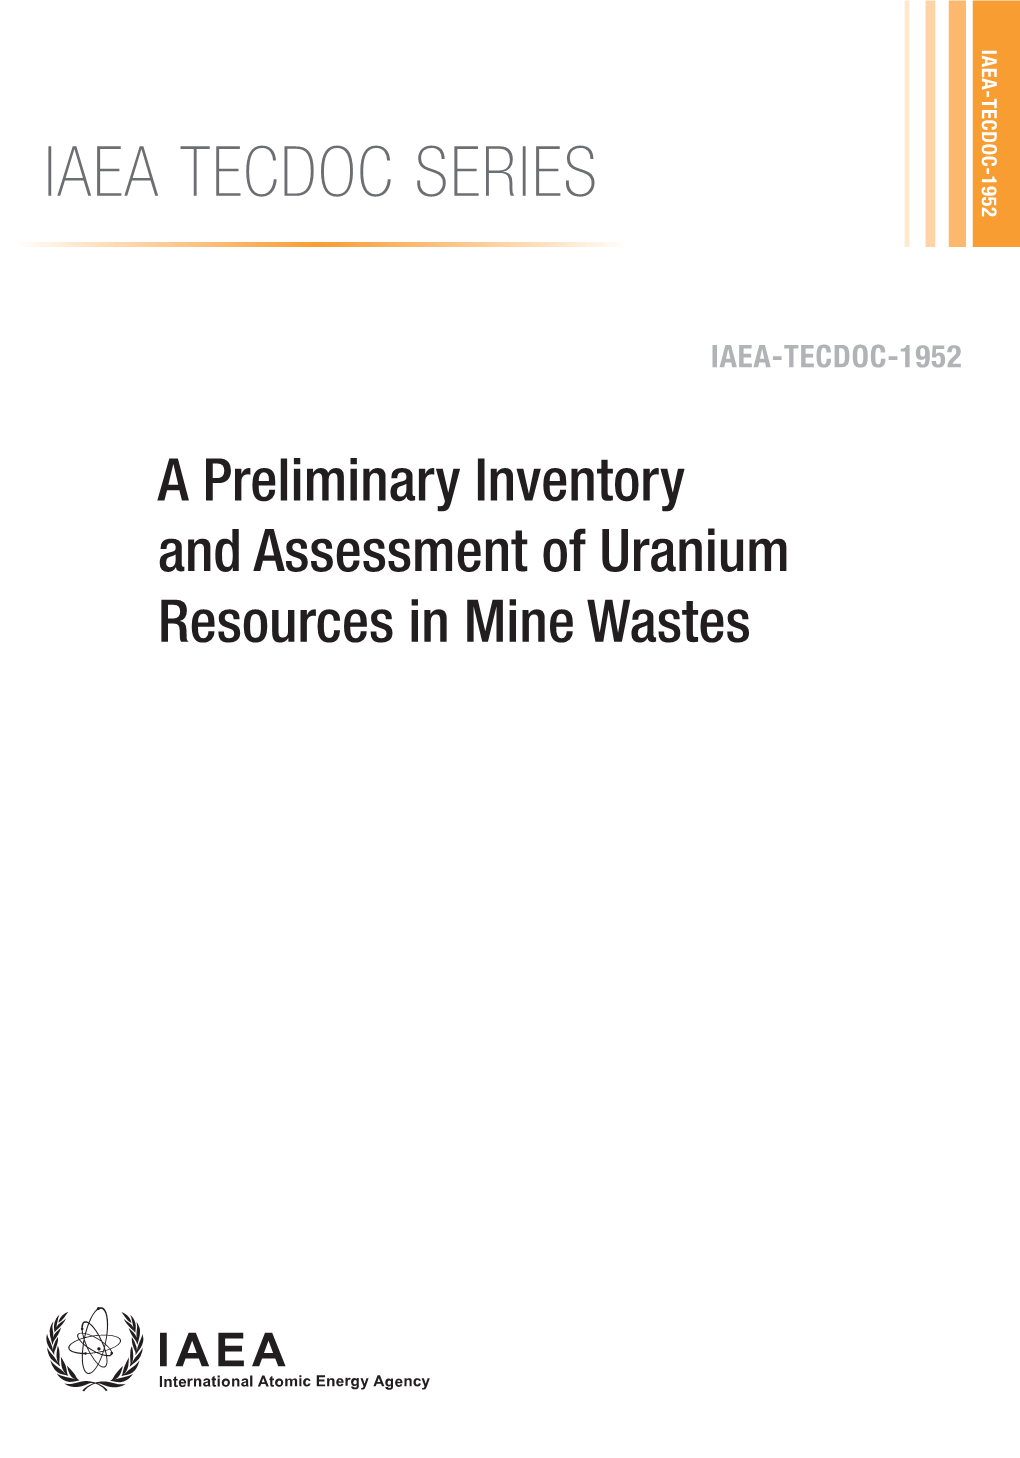 A Preliminary Inventory and Assessment of Uranium Resources in Mine Wastes